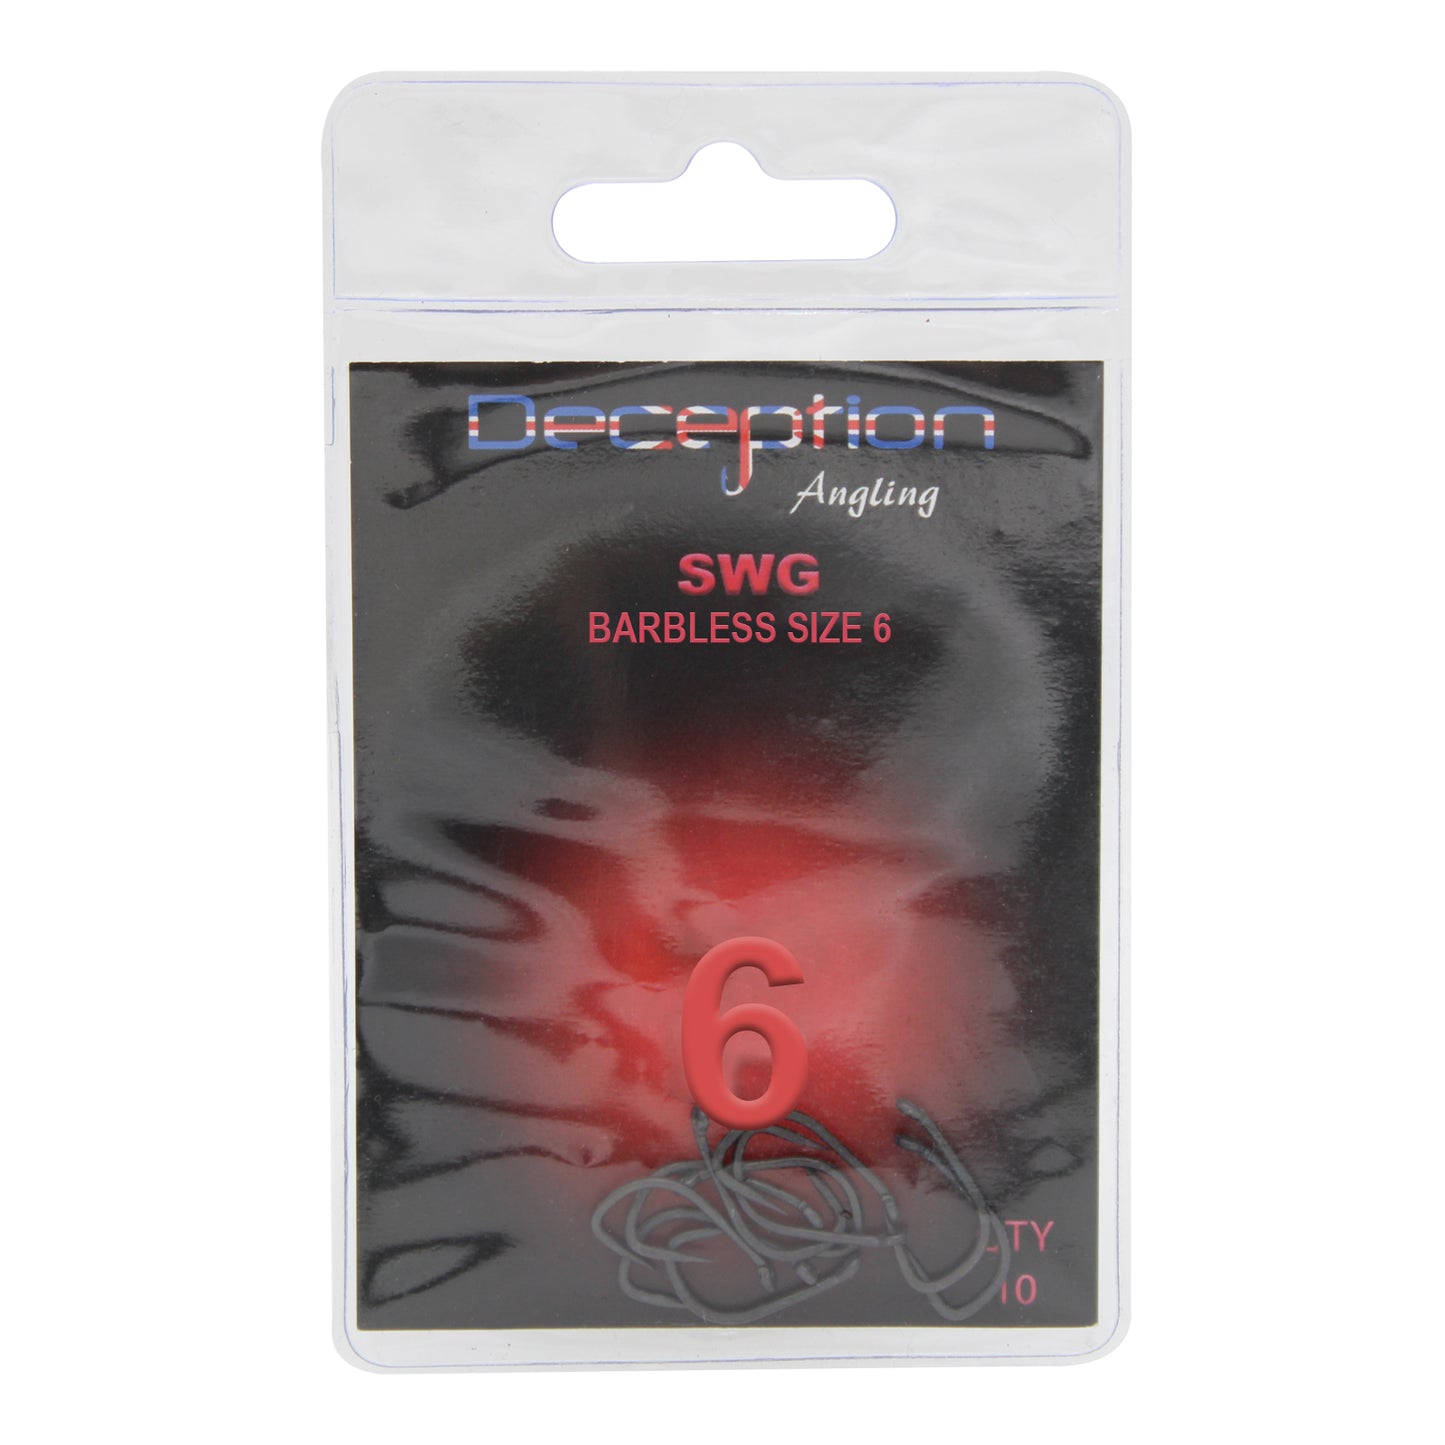 Deception Angling SWG Barbless Hooks Size 6 Pack of 10